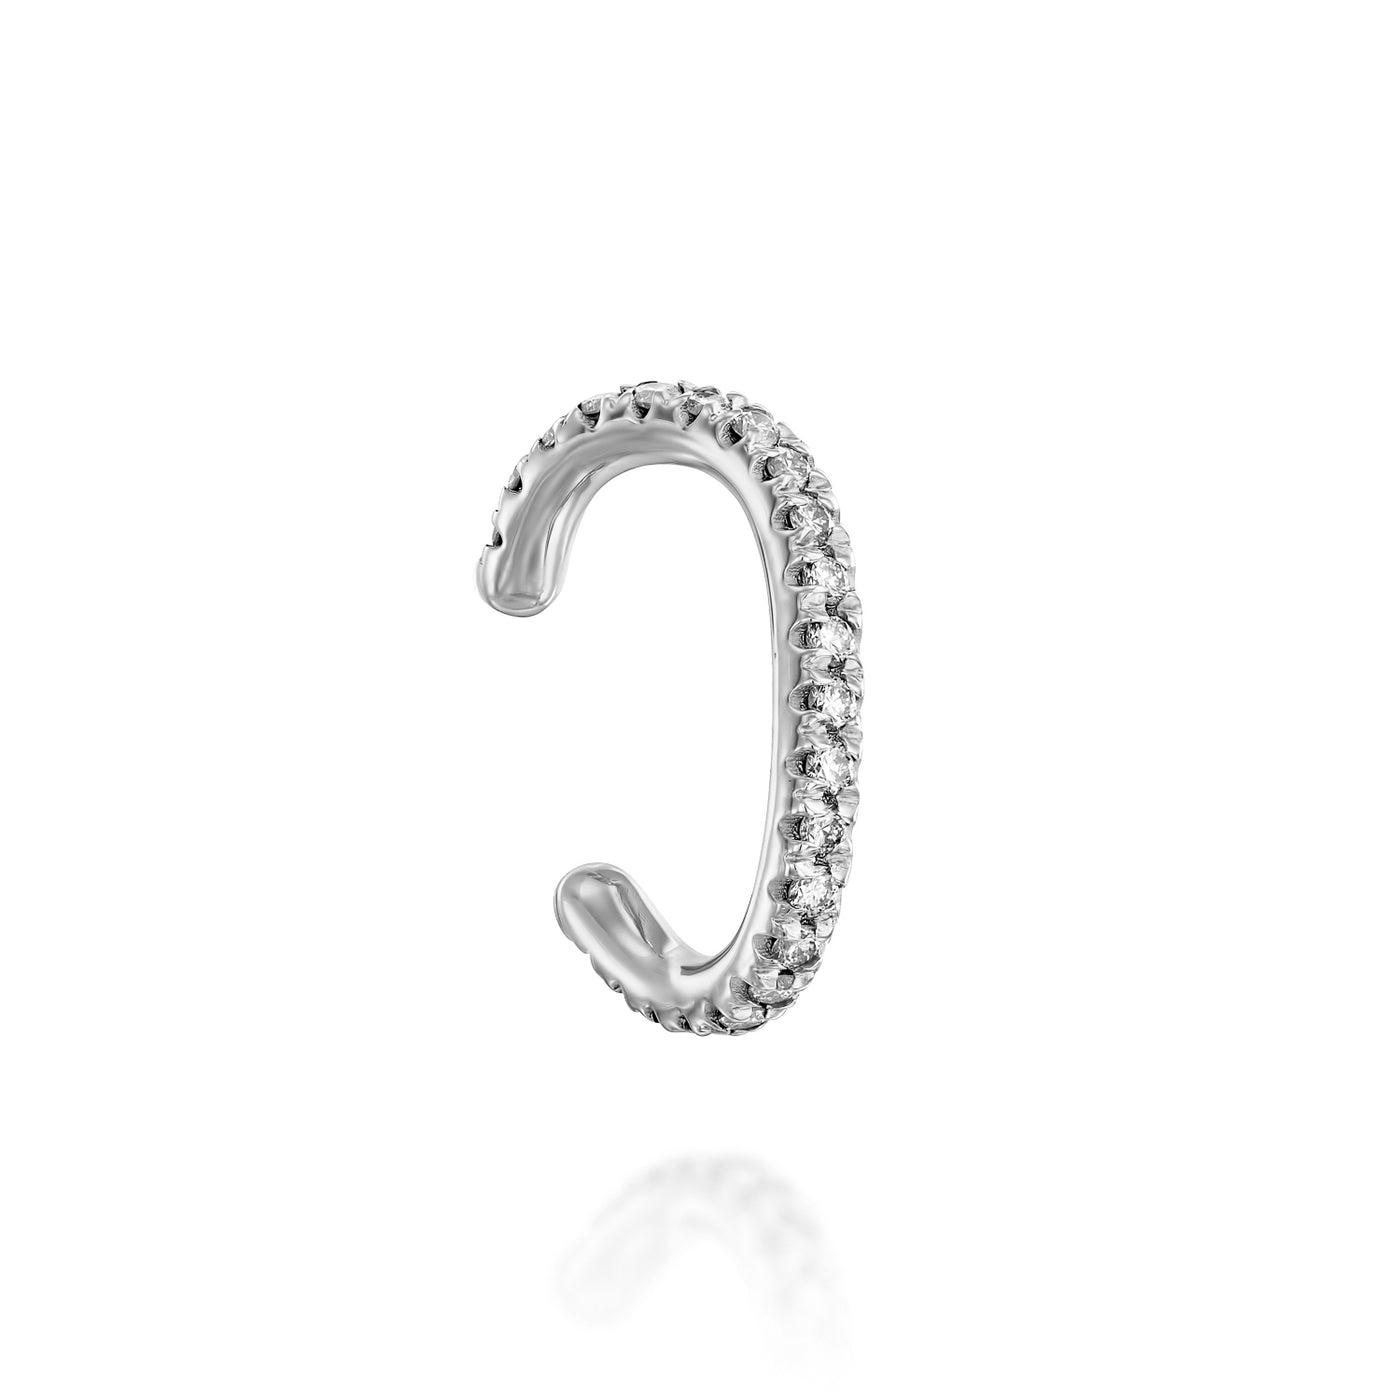 This unique 14K gold piercing is the perfect non-pierced cartilage pave diamond ear cuff, a beautiful solid gold ear wrap.